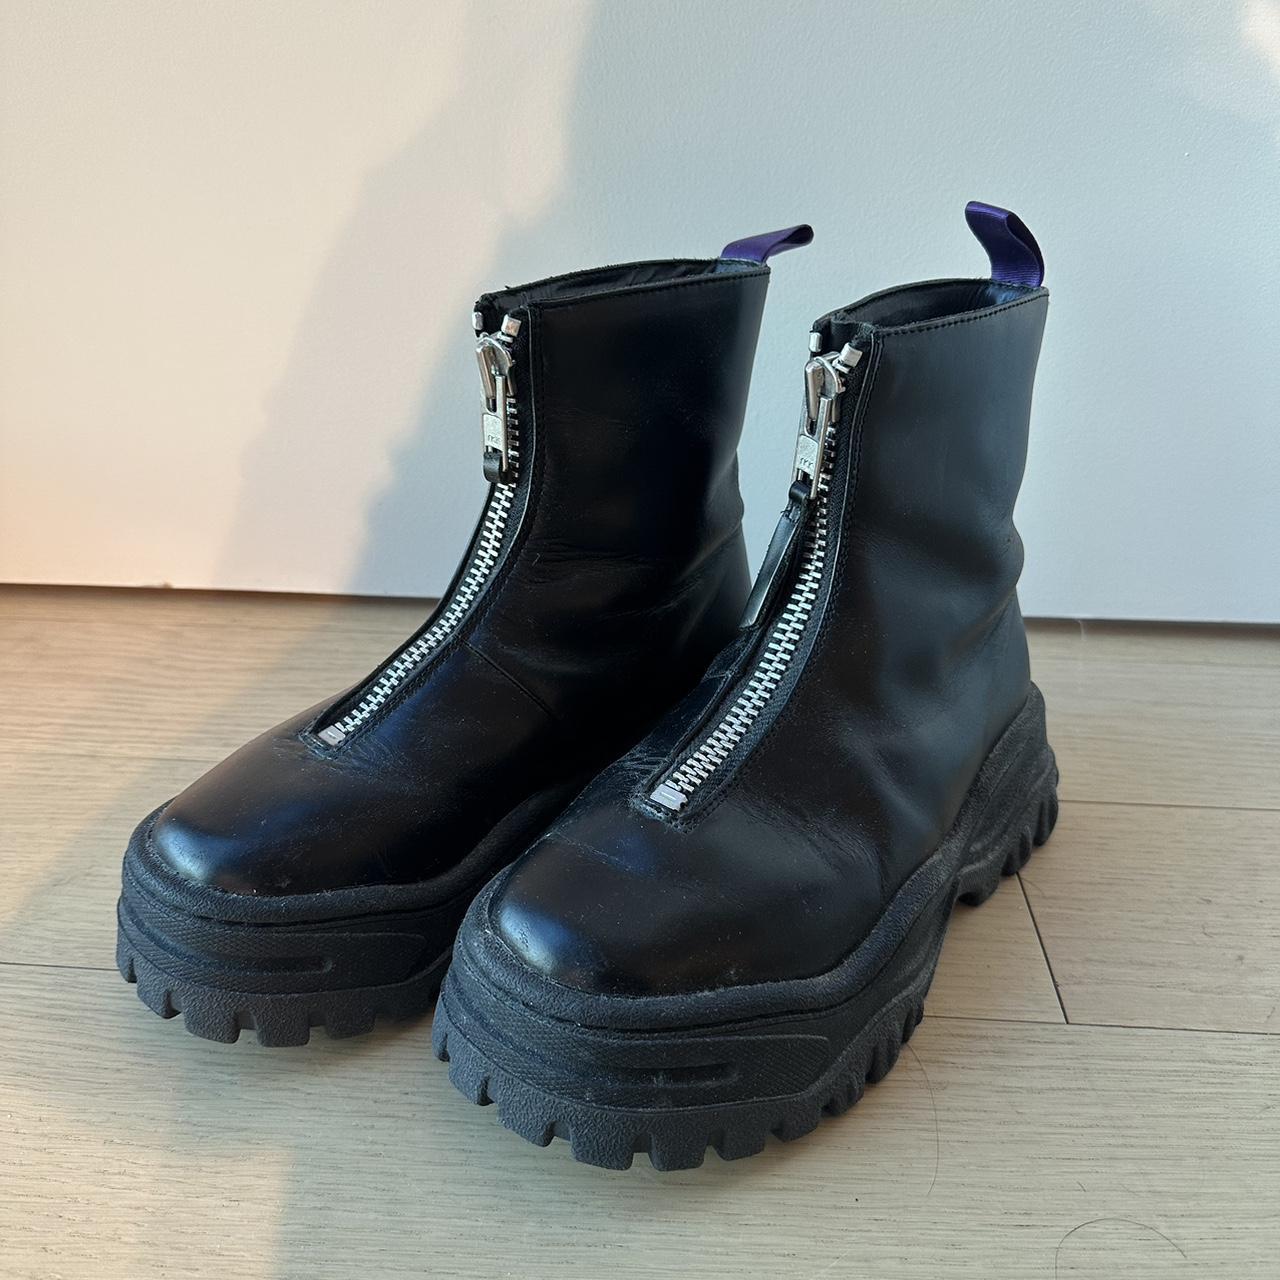 Eytys Raven Boots in Black Leather, size EU37. One... - Depop